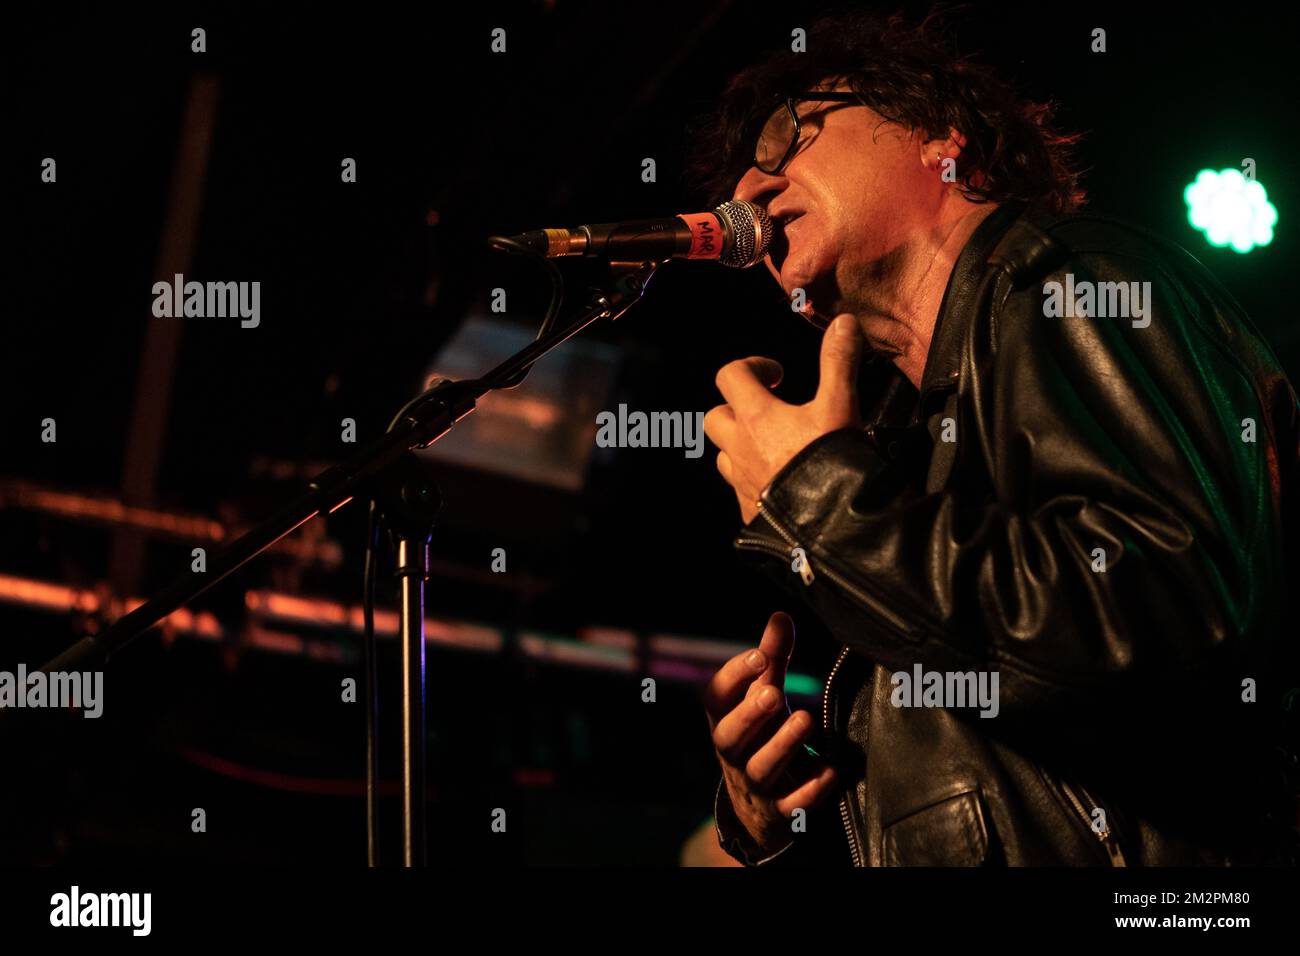 Oxford, United Kingdom. 13th, December 2022. The English rock band The Chameleons performs a live concert at the O2 Academy Oxford in Oxford. Here singer and bass player Mark Burgess is seen live on stage. (Photo credit: Gonzales Photo – Per-Otto Oppi). Stock Photo